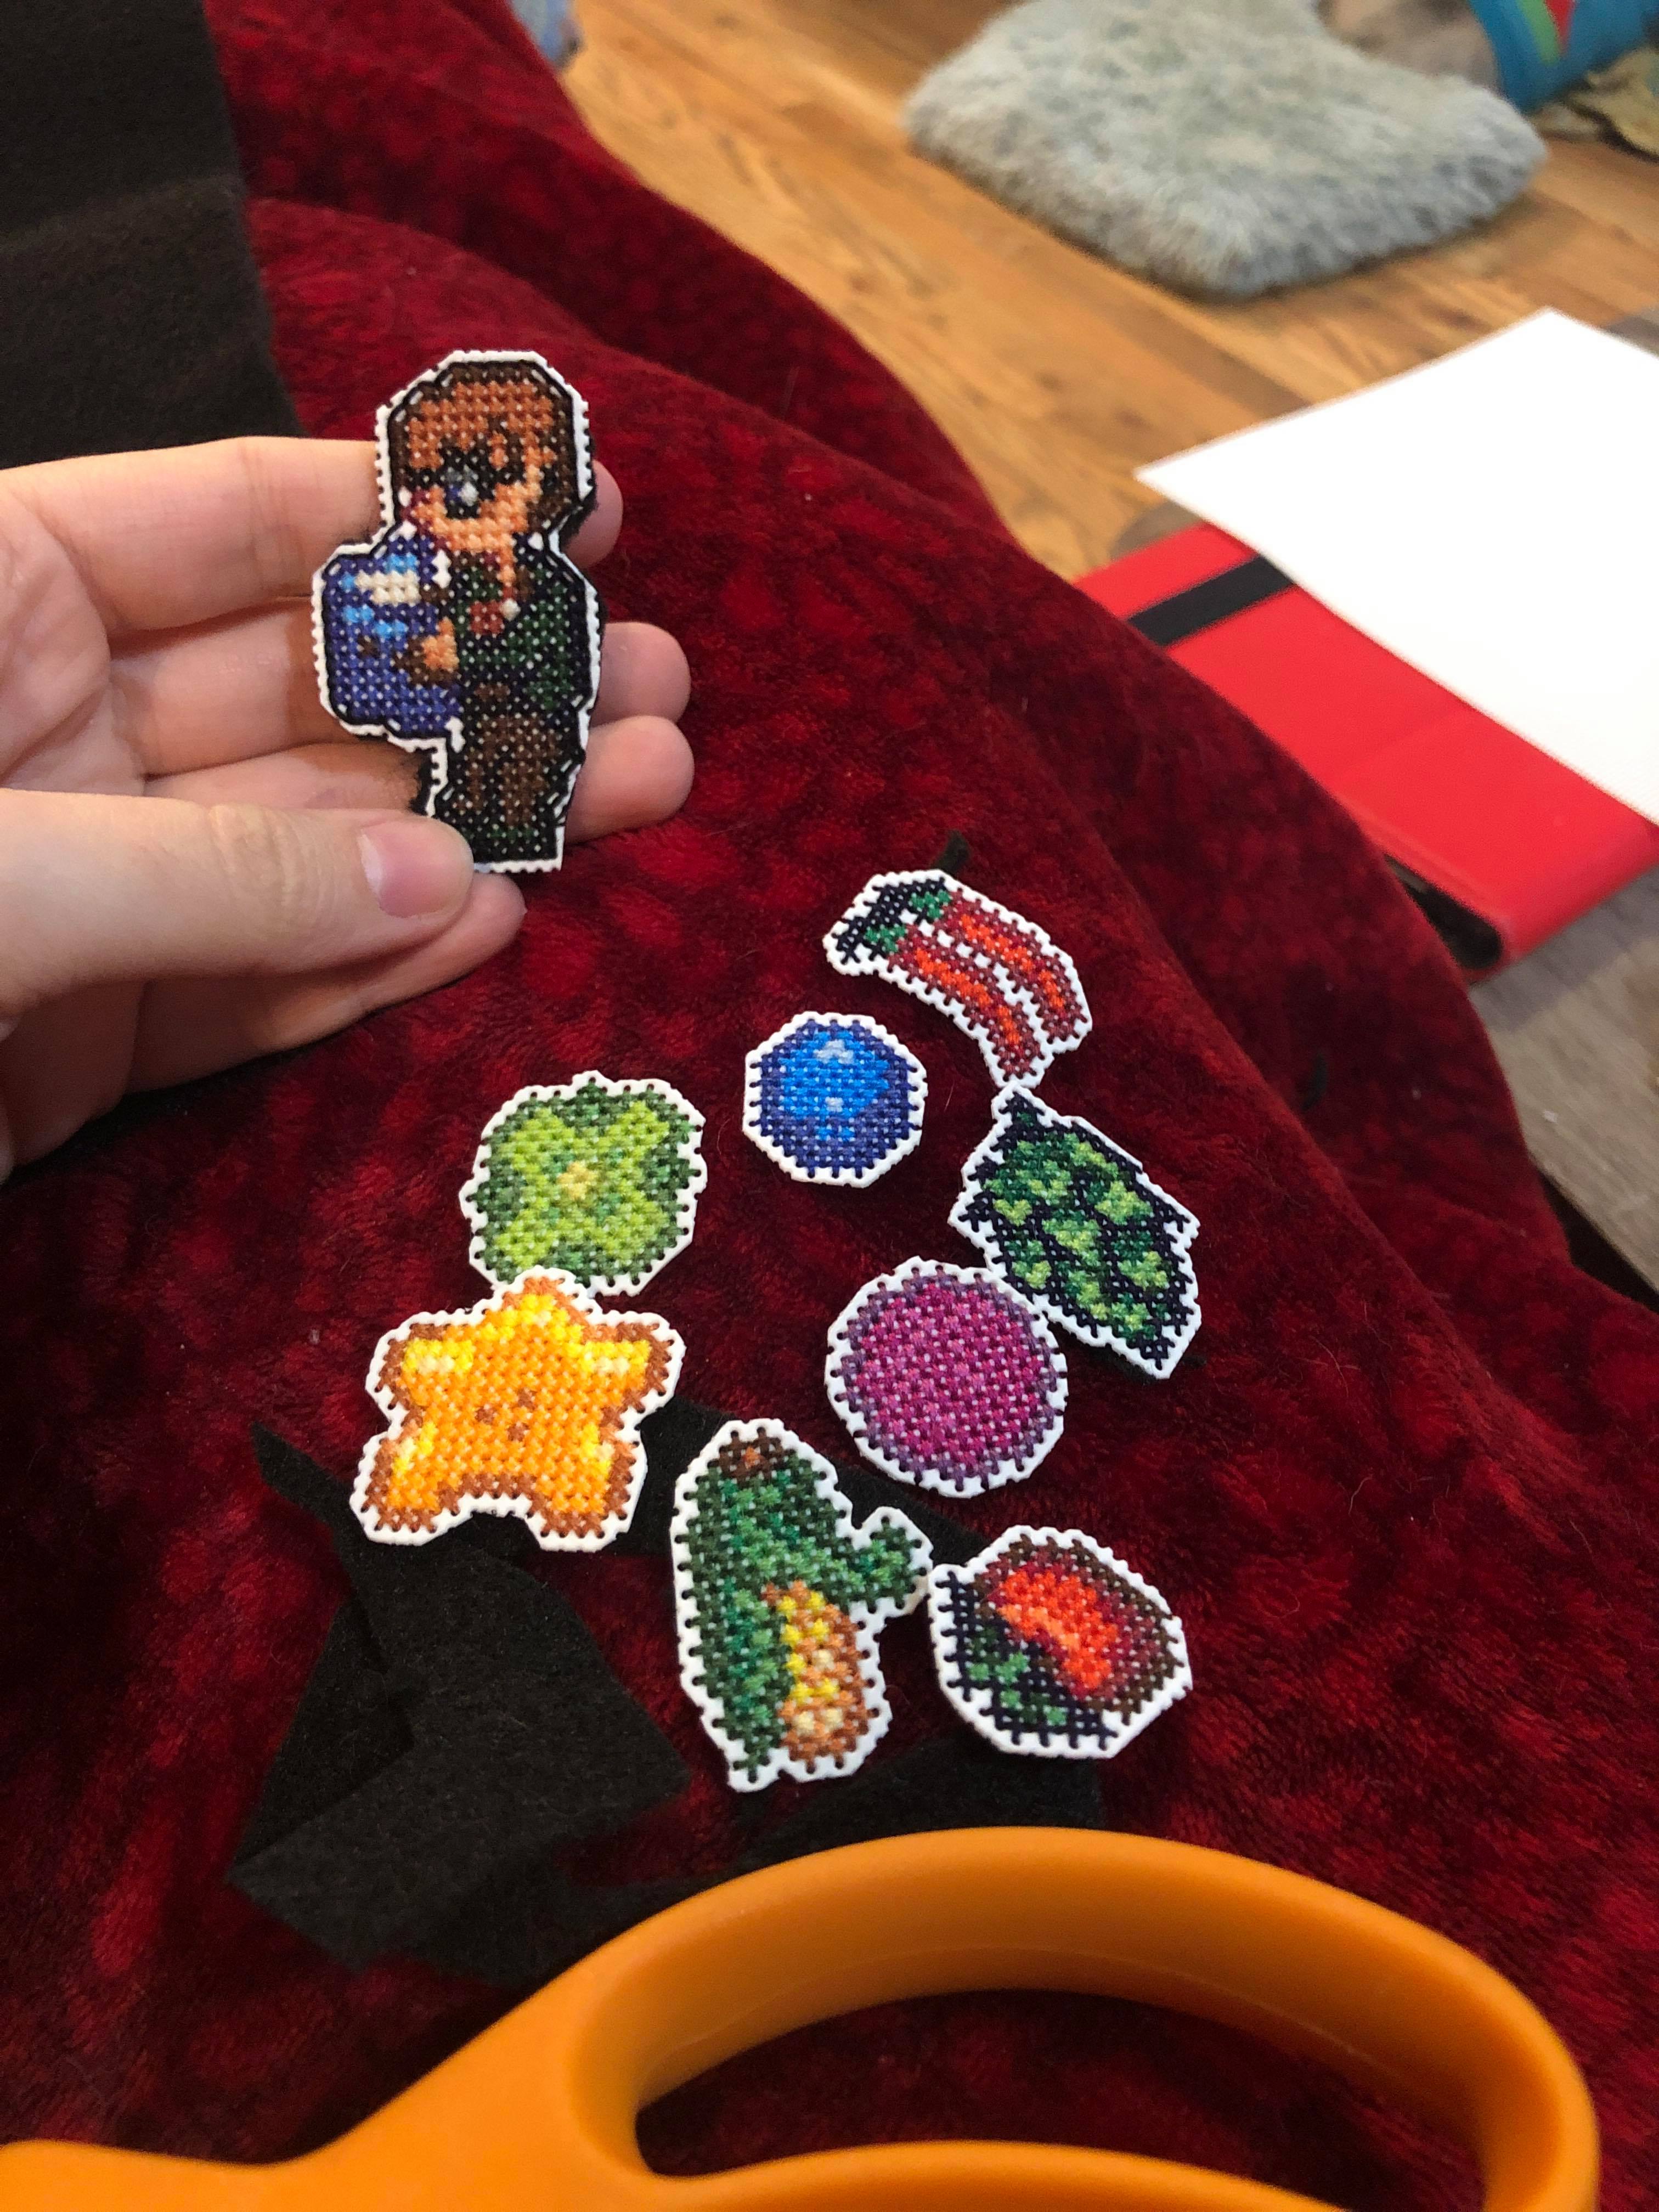 Small cross stitches of various things from stardew valley turned into magnets